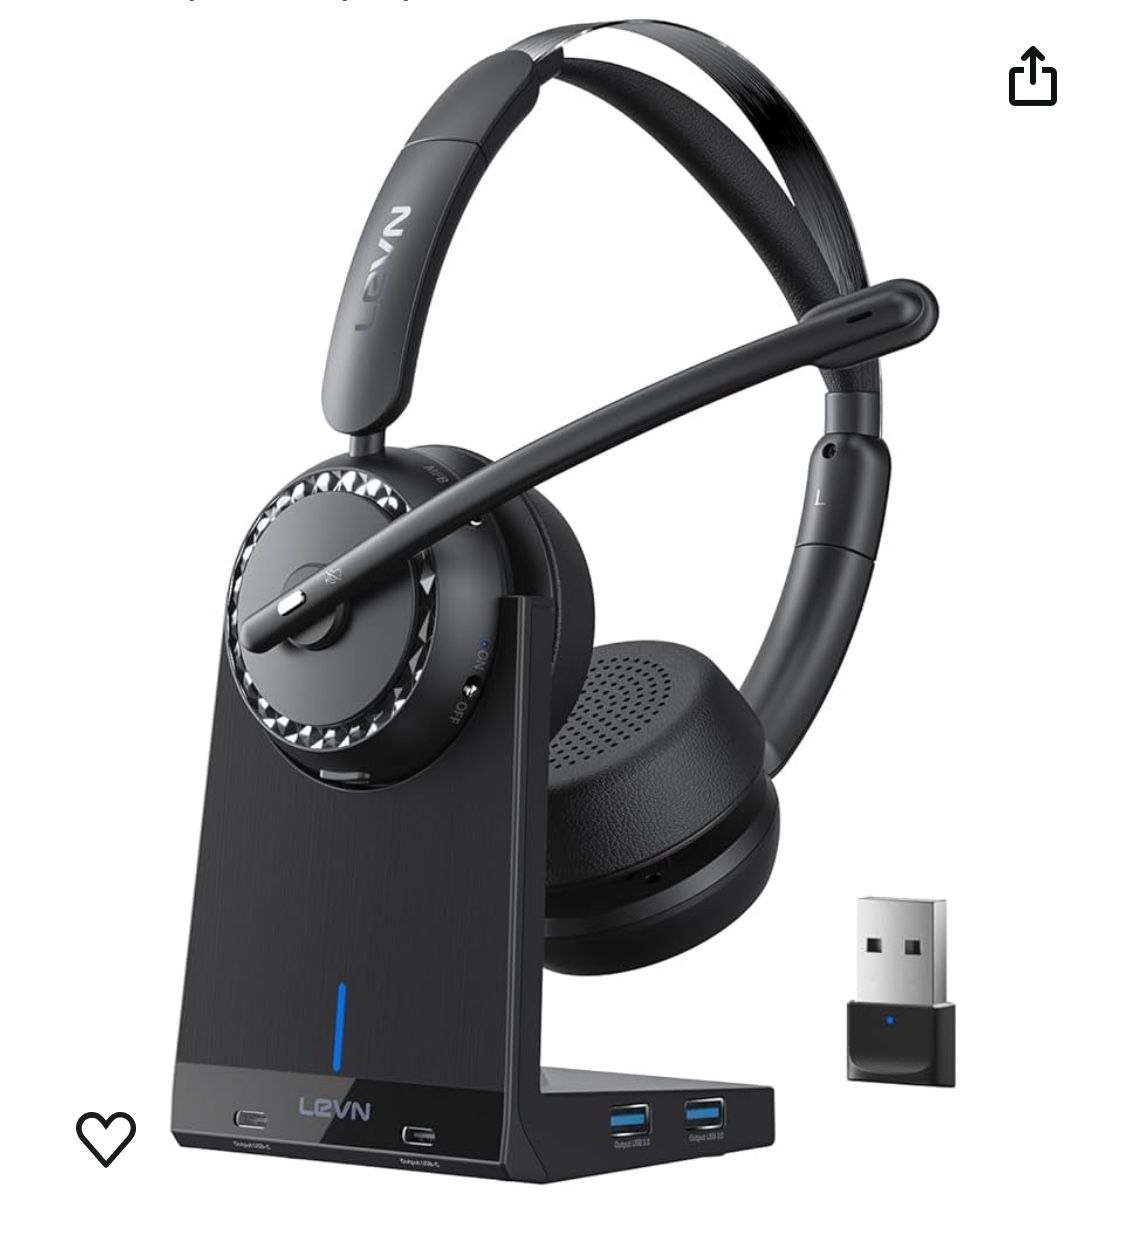 LEVN Wireless Headset, Bluetooth 5.2 Headset with Microphone (AI Noise Cancelling), 4 USB 3.0 Ports, 65 Hrs Working Time, Wireless Headset with Mic fo